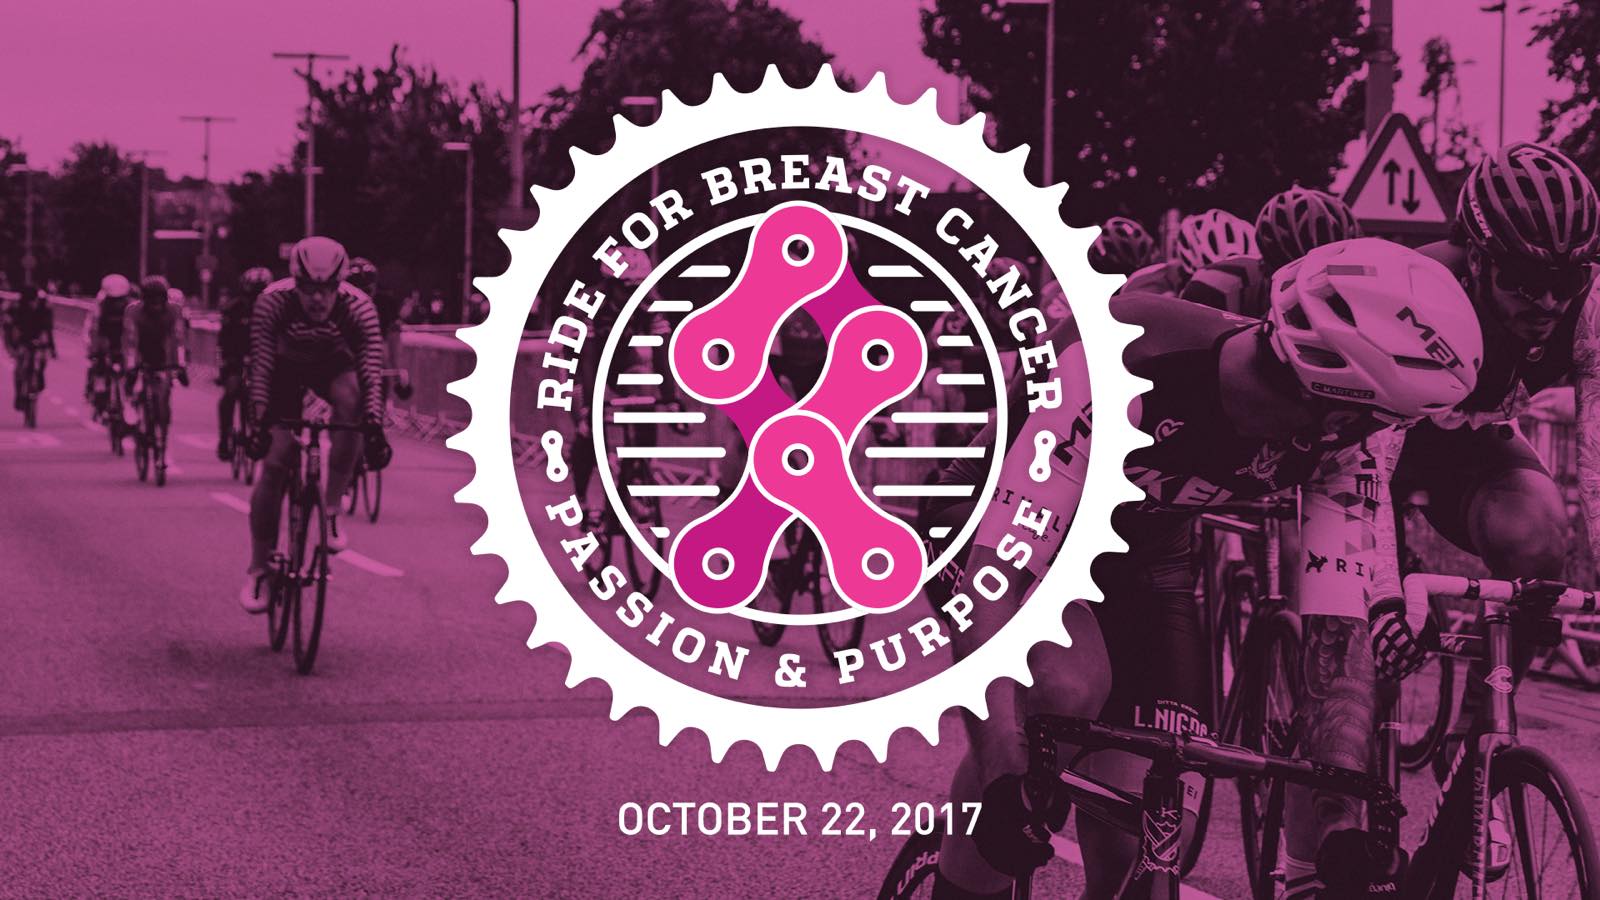 Ride for Breast Cancer Awareness and Prevention. The Miami Bike Scene